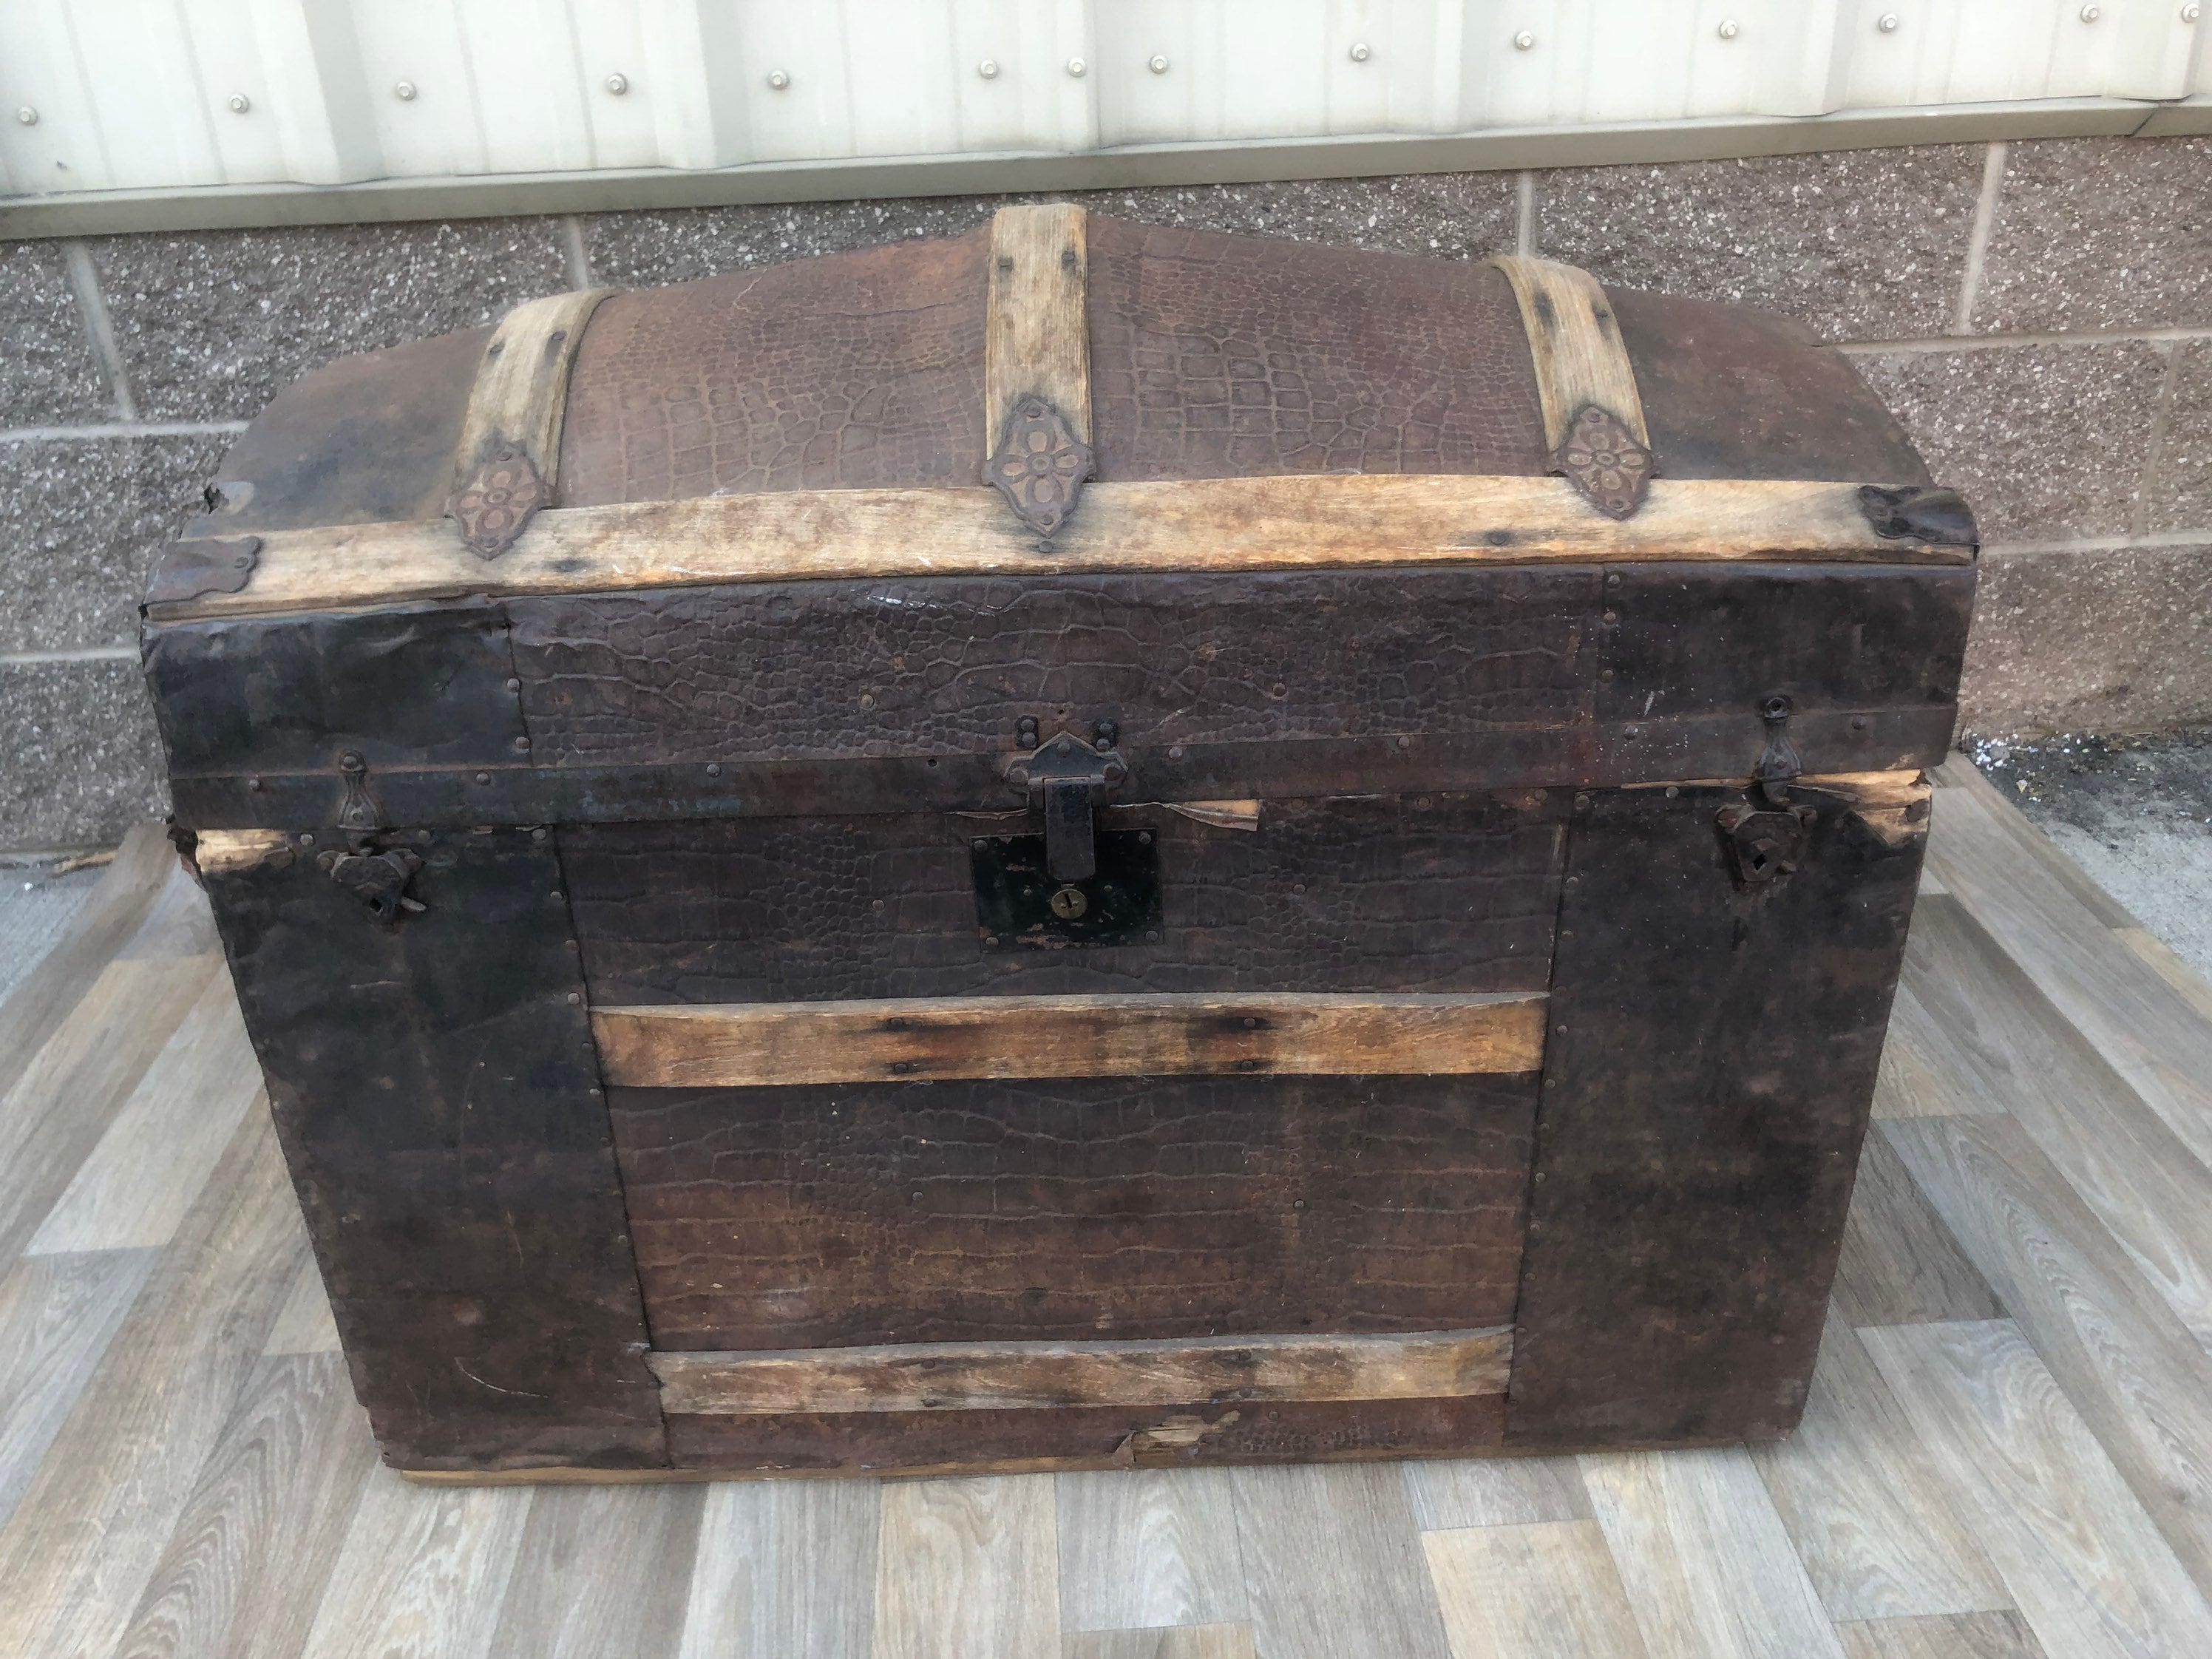 317 Restored dome top steamer trunk Antique Trunks Top Quality